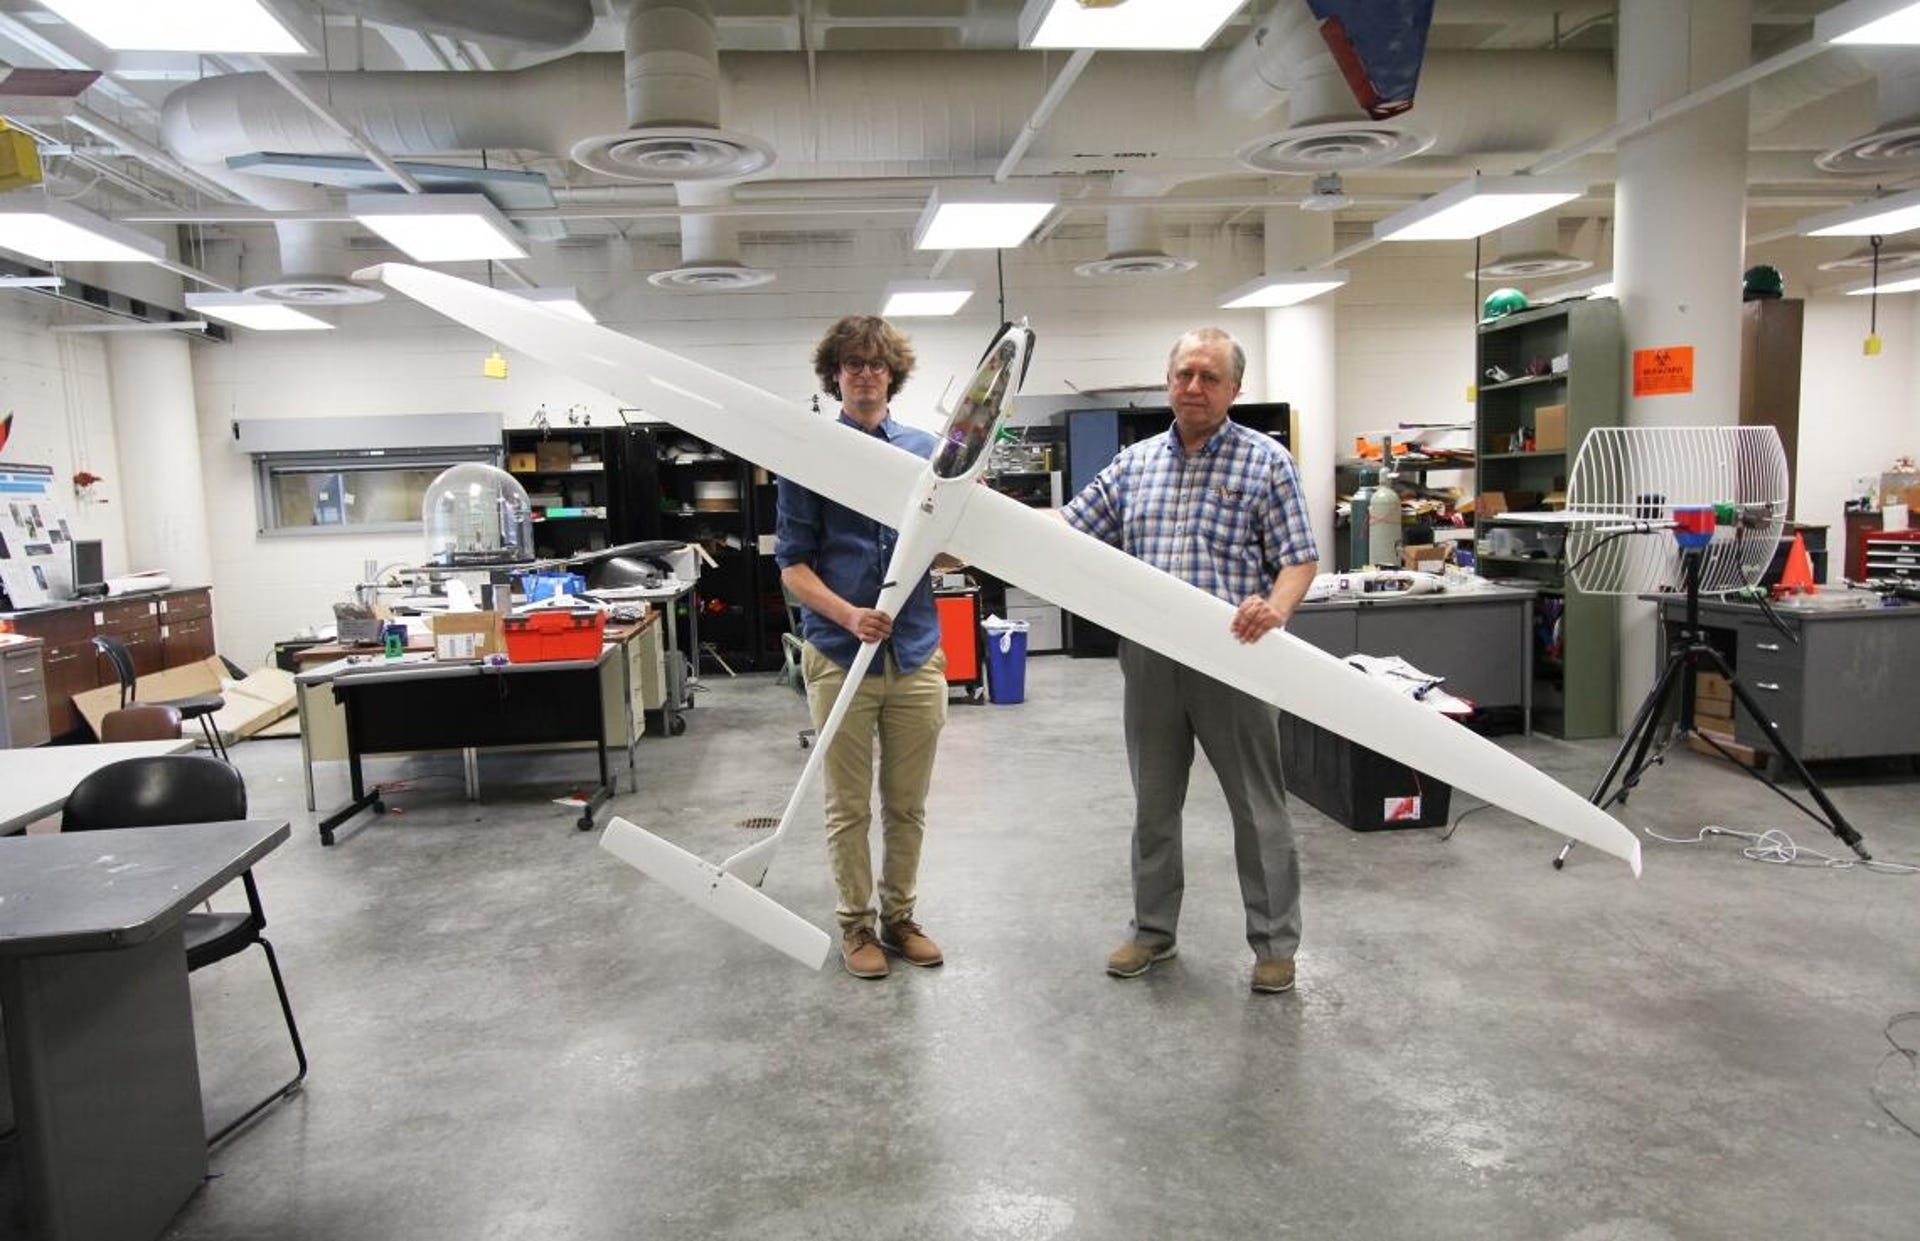 Two people stand in a room holding a white sailplane by the wings.